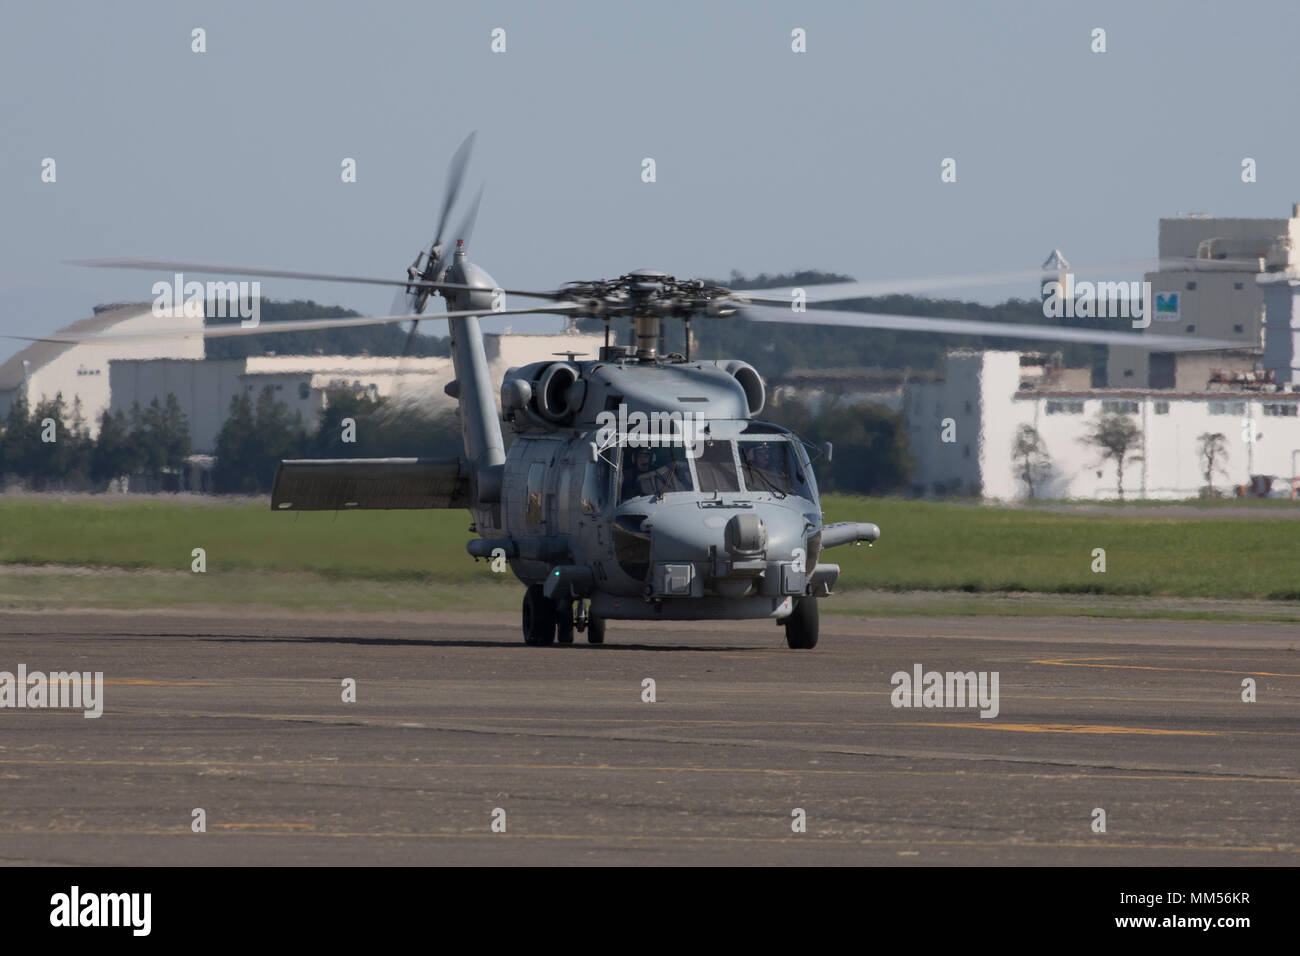 A U.S. Navy MH-60R Seahawk assigned to Helicopter Maritime Strike Squadron (HSM) 51, Naval Air Facility Atsugi, taxis the flight line at Yokota Air Base, Japan, Sept. 3, 2017, during the Tokyo Metropolis Comprehensive Disaster Prevention Drill. U.S. military helicopters from Naval Air Facility Atsugi, Camp Zama, and Yokota participated in the drill, where humanitarian supplies were offloaded from each aircraft at Yokota to simulate the interoperability of U.S. and Tokyo Metropolitan Government in responding to a natural disaster. (U.S. Air Force photo by Yasuo Osakabe) Stock Photo